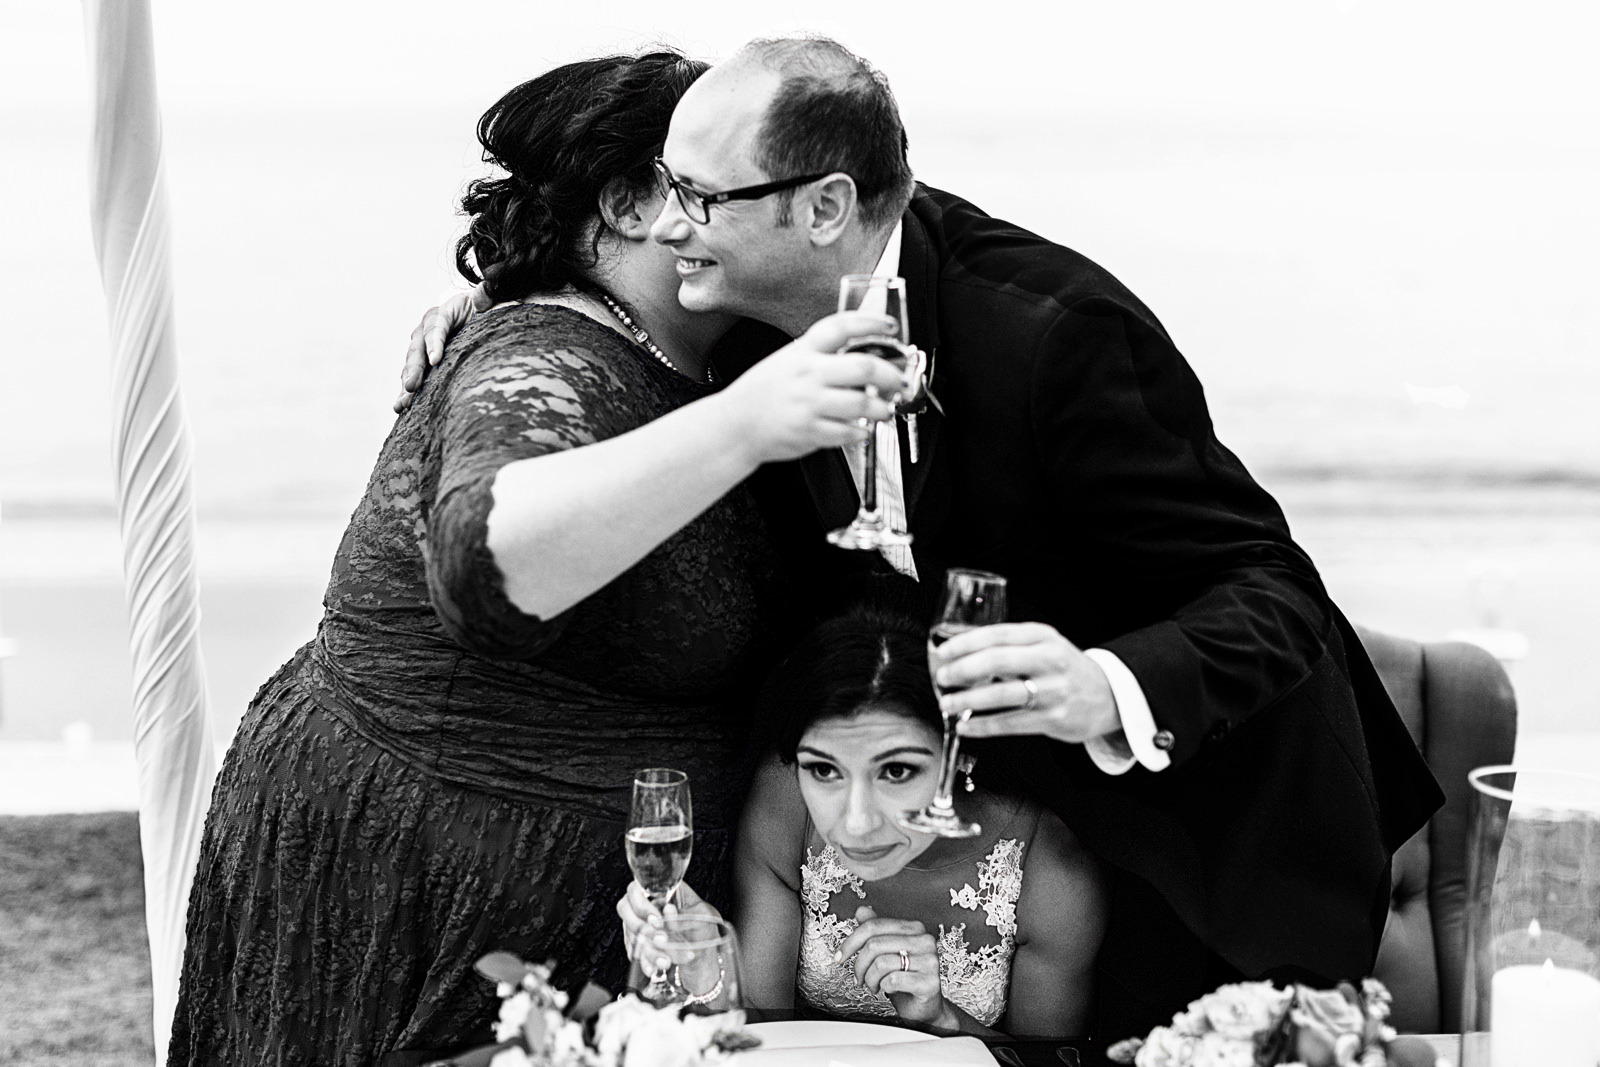 Maid of honor and groom hug after speech and squish bride between them - Fearless award